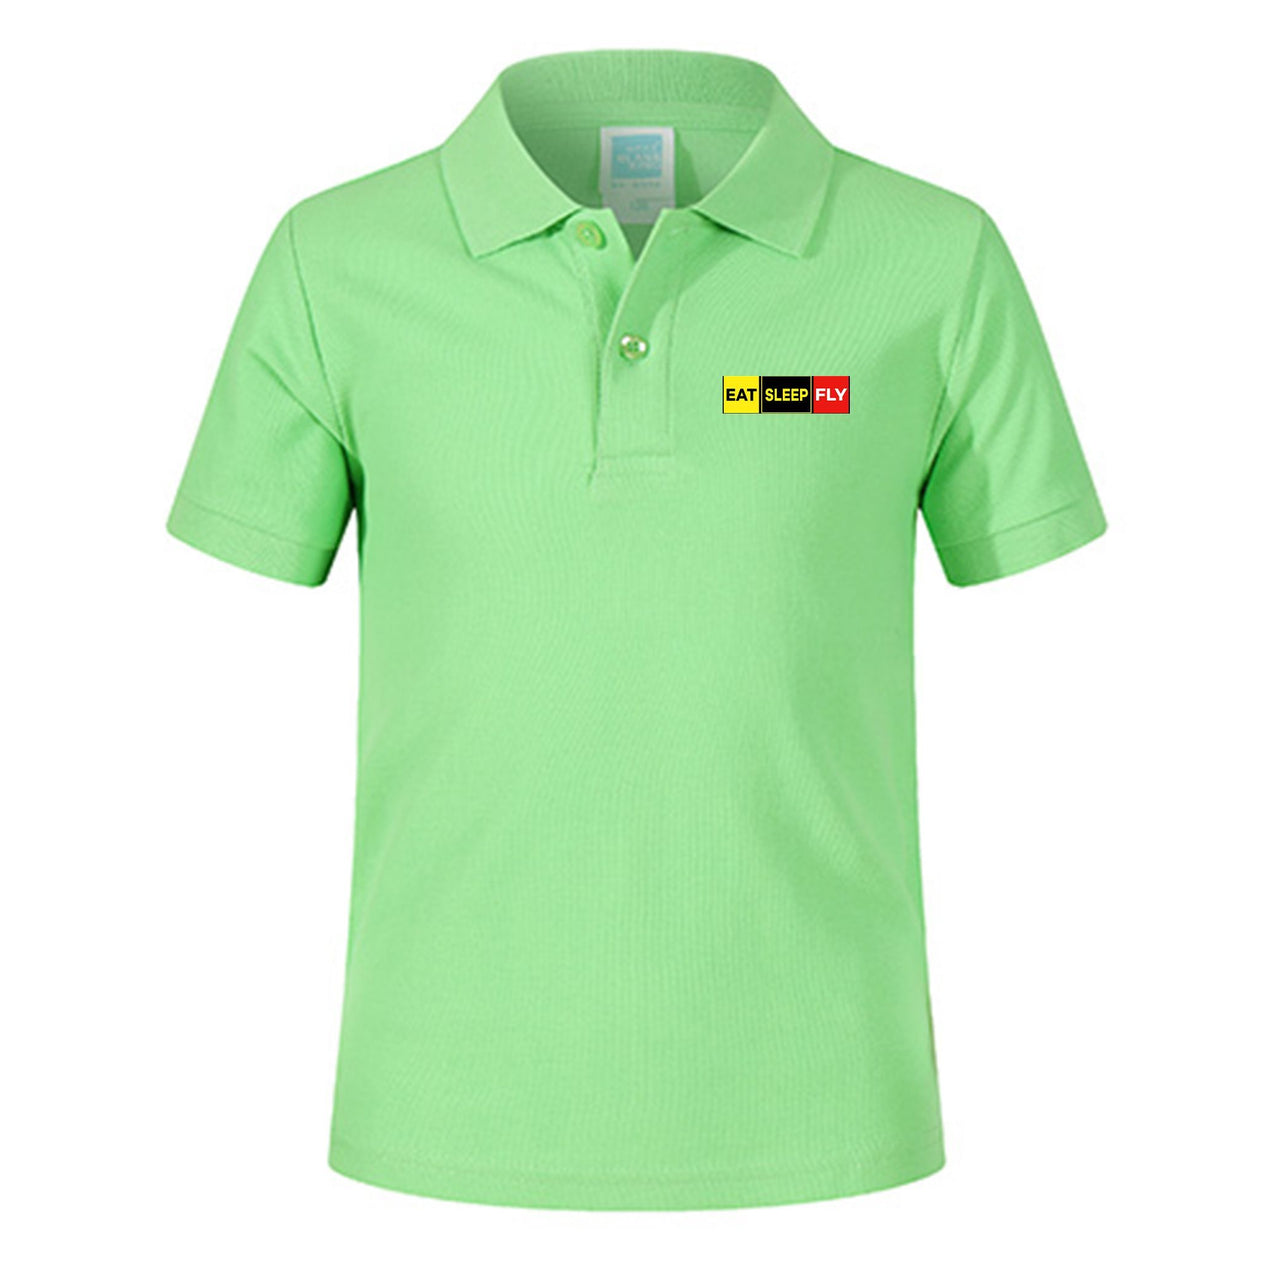 Eat Sleep Fly (Colourful) Designed Children Polo T-Shirts